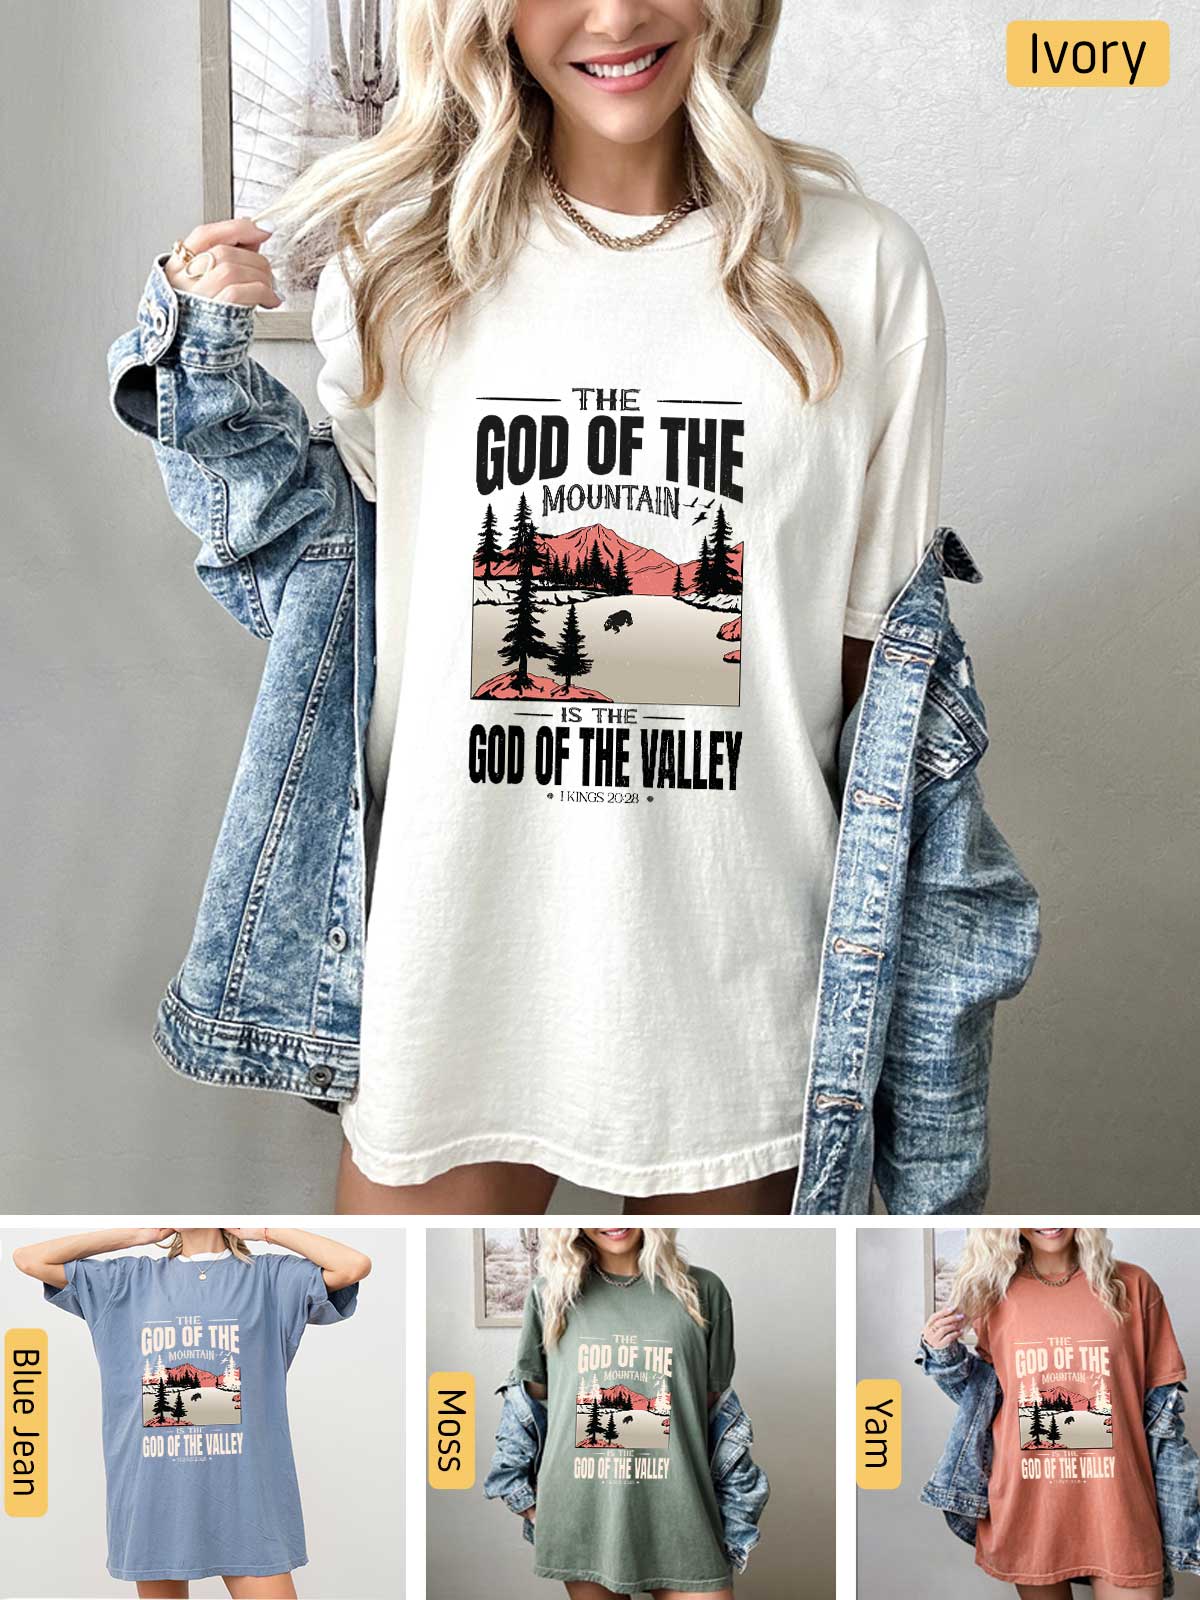 a collage of photos of a woman wearing a t - shirt